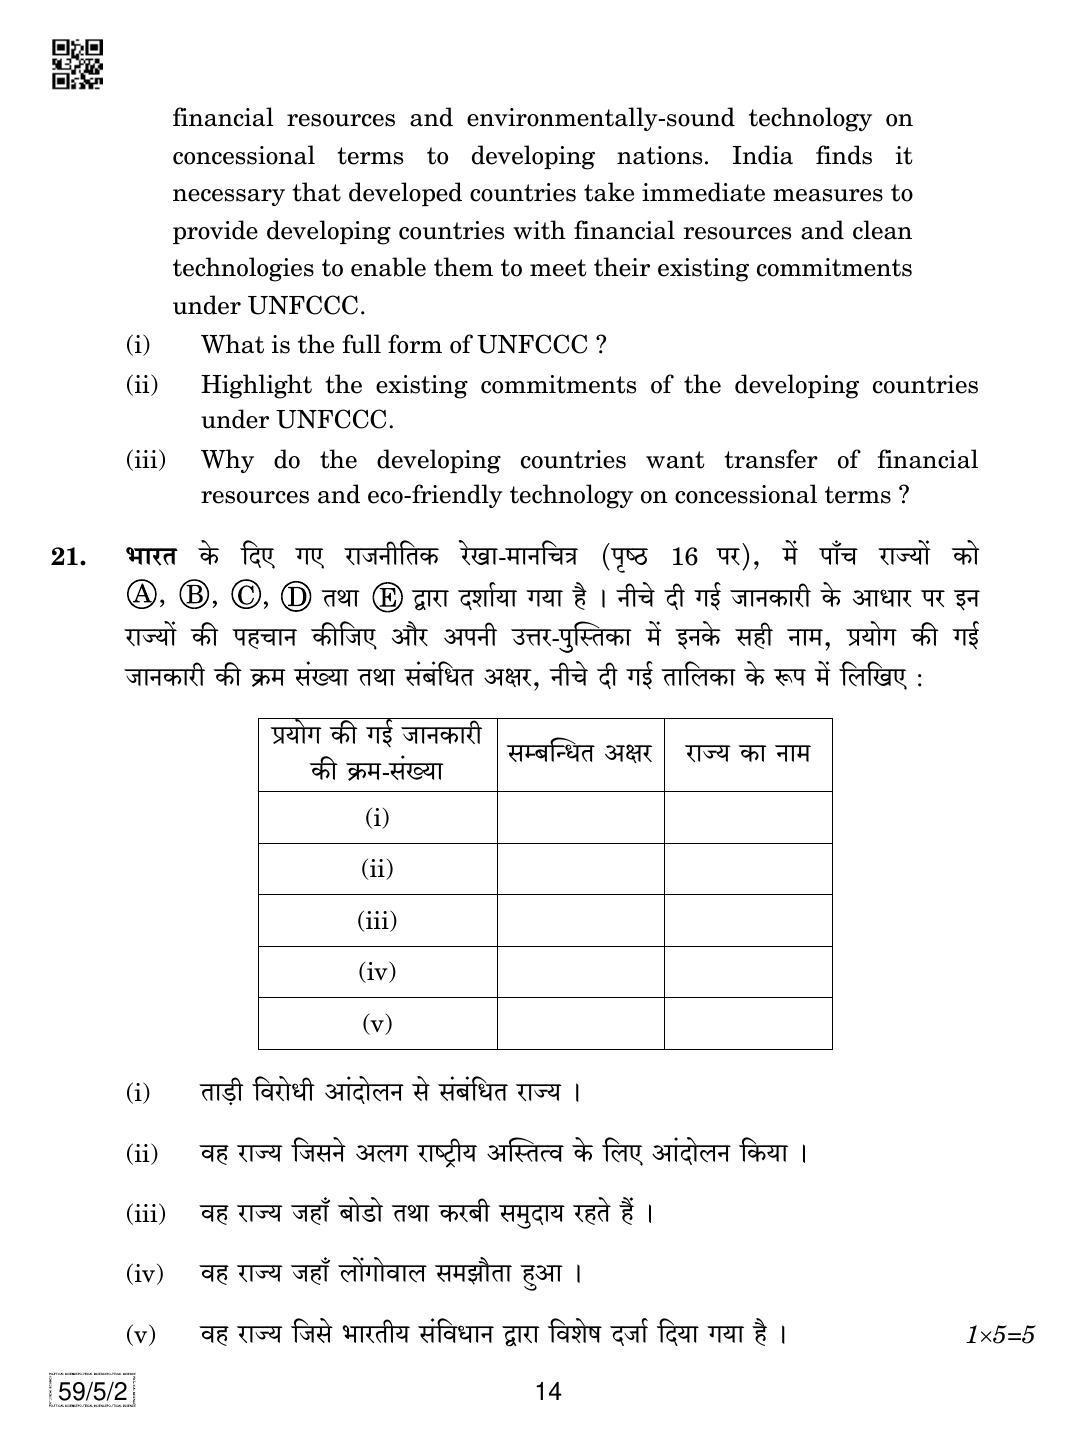 CBSE Class 12 59-5-2 Political Science 2019 Question Paper - Page 14